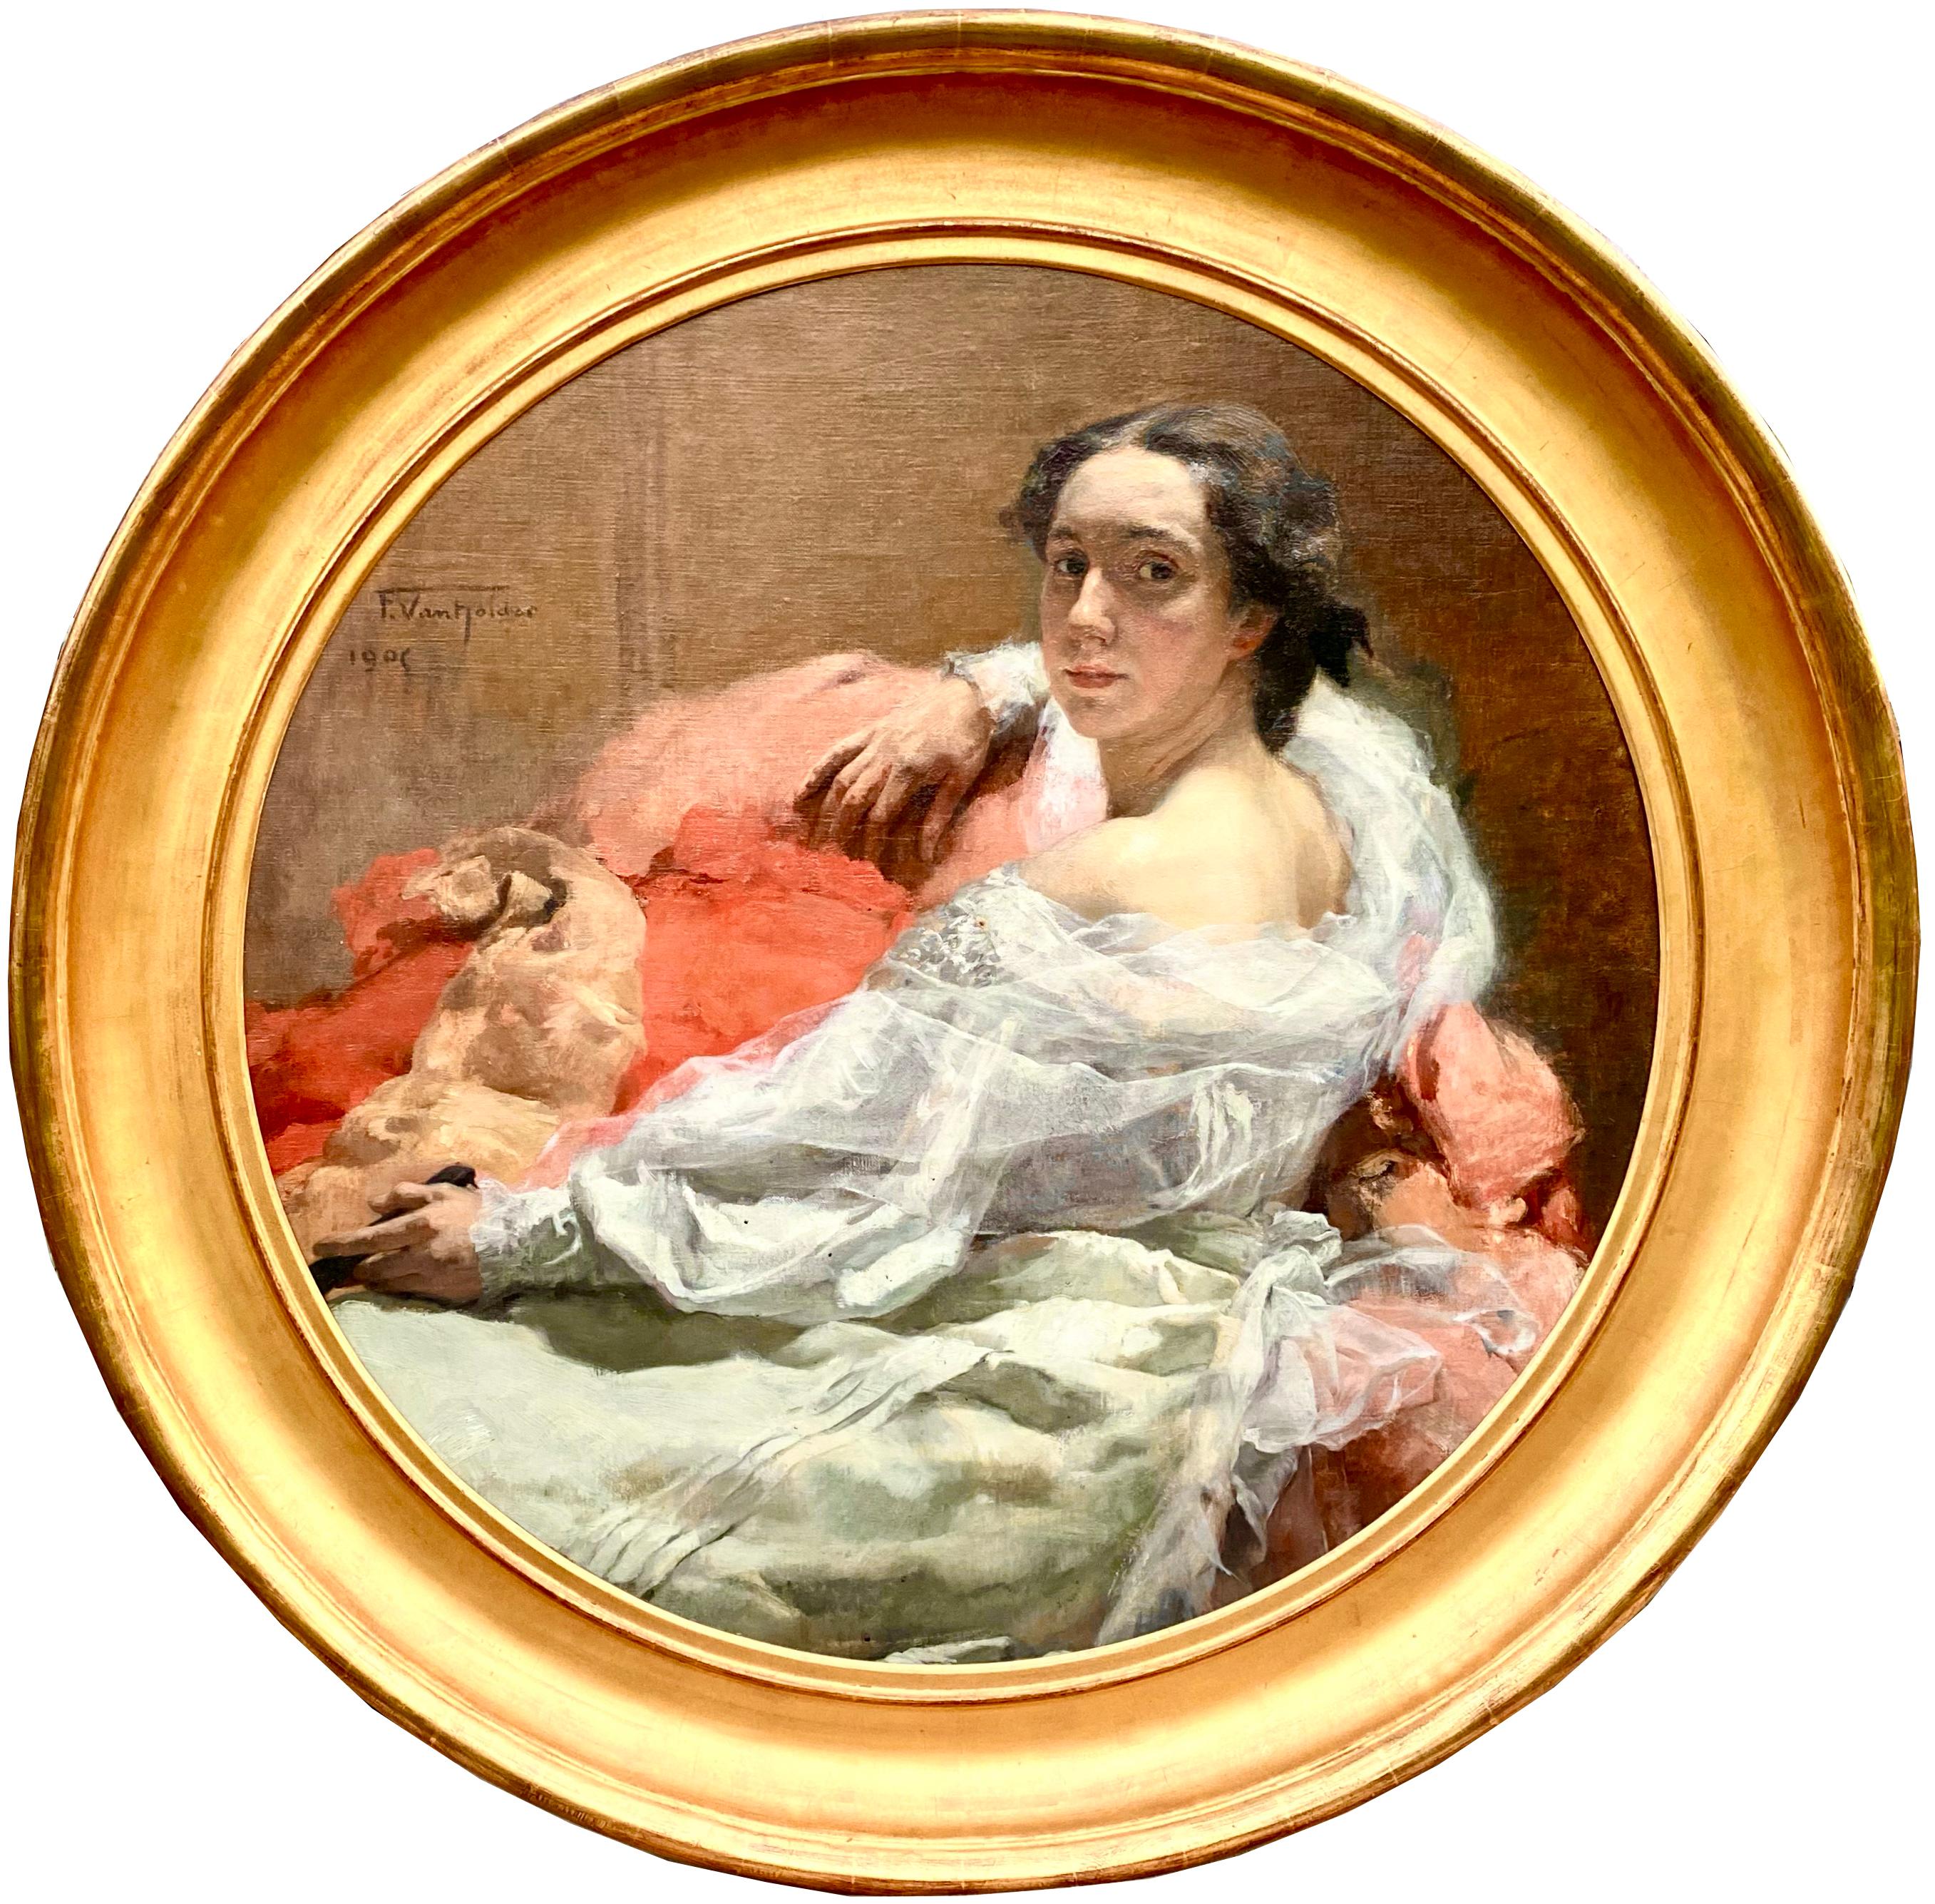 Frans Van Holder
Ixelles 1881 – 1919 Geneva
Belgian Painter

'Portrait of a Young Woman in White – The Artist’s Wife'
Signature: Signed top left and dated 1906
Medium: Oil on canvas
Dimensions: diameter: image size 96 cm, frame size 120,50